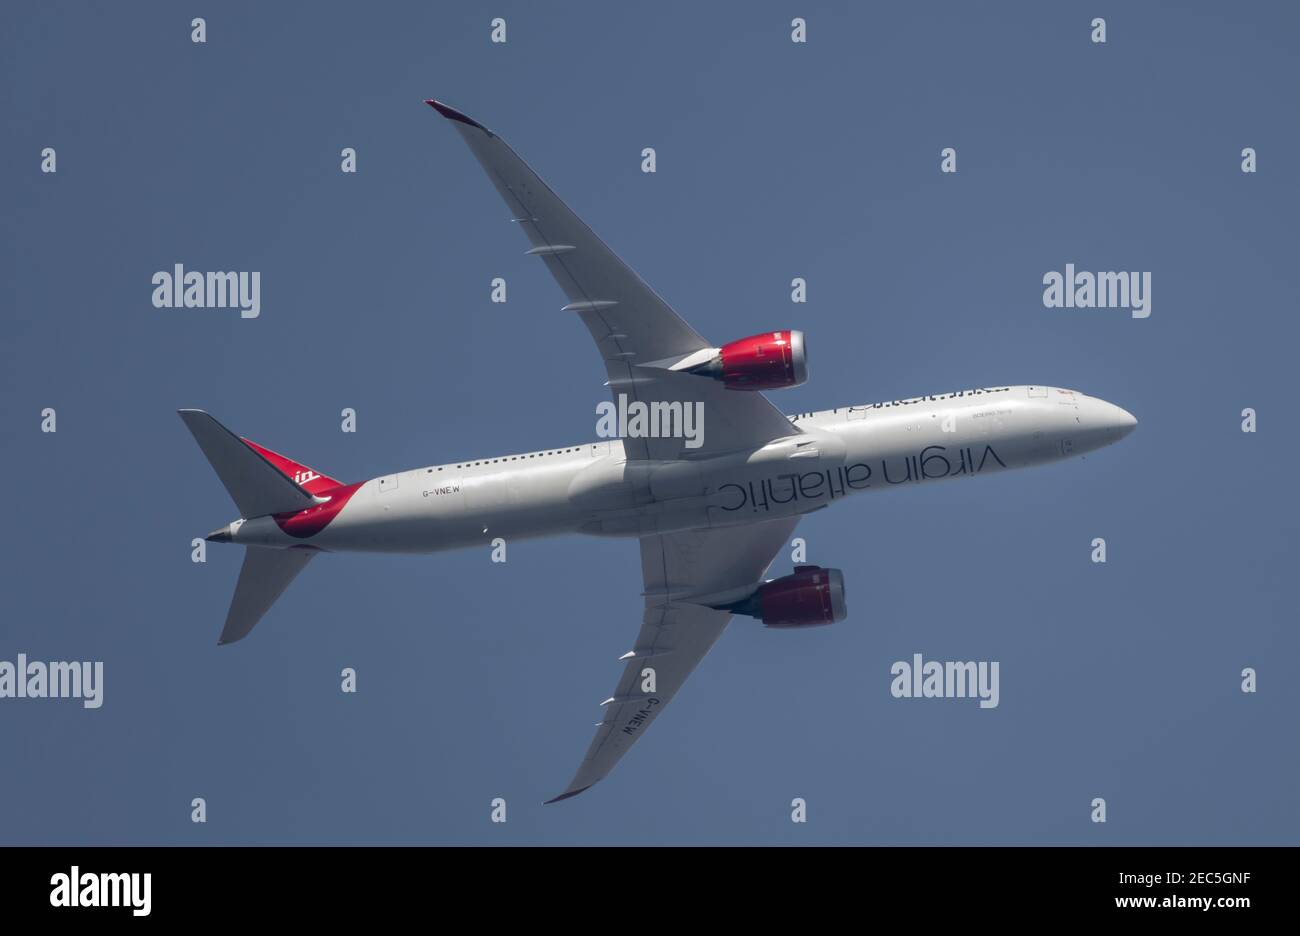 London, UK. 13 February 2021. Air traffic over London during the Covid-19 pandemic. Virgin Atlantic Boeing 787 Dreamliner ‘Birthday Girl’ G-VNEW flies over Wimbledon after leaving London Heathrow en route to Islamabad in hazy afternoon sky. Credit: Malcolm Park/Alamy. Stock Photo